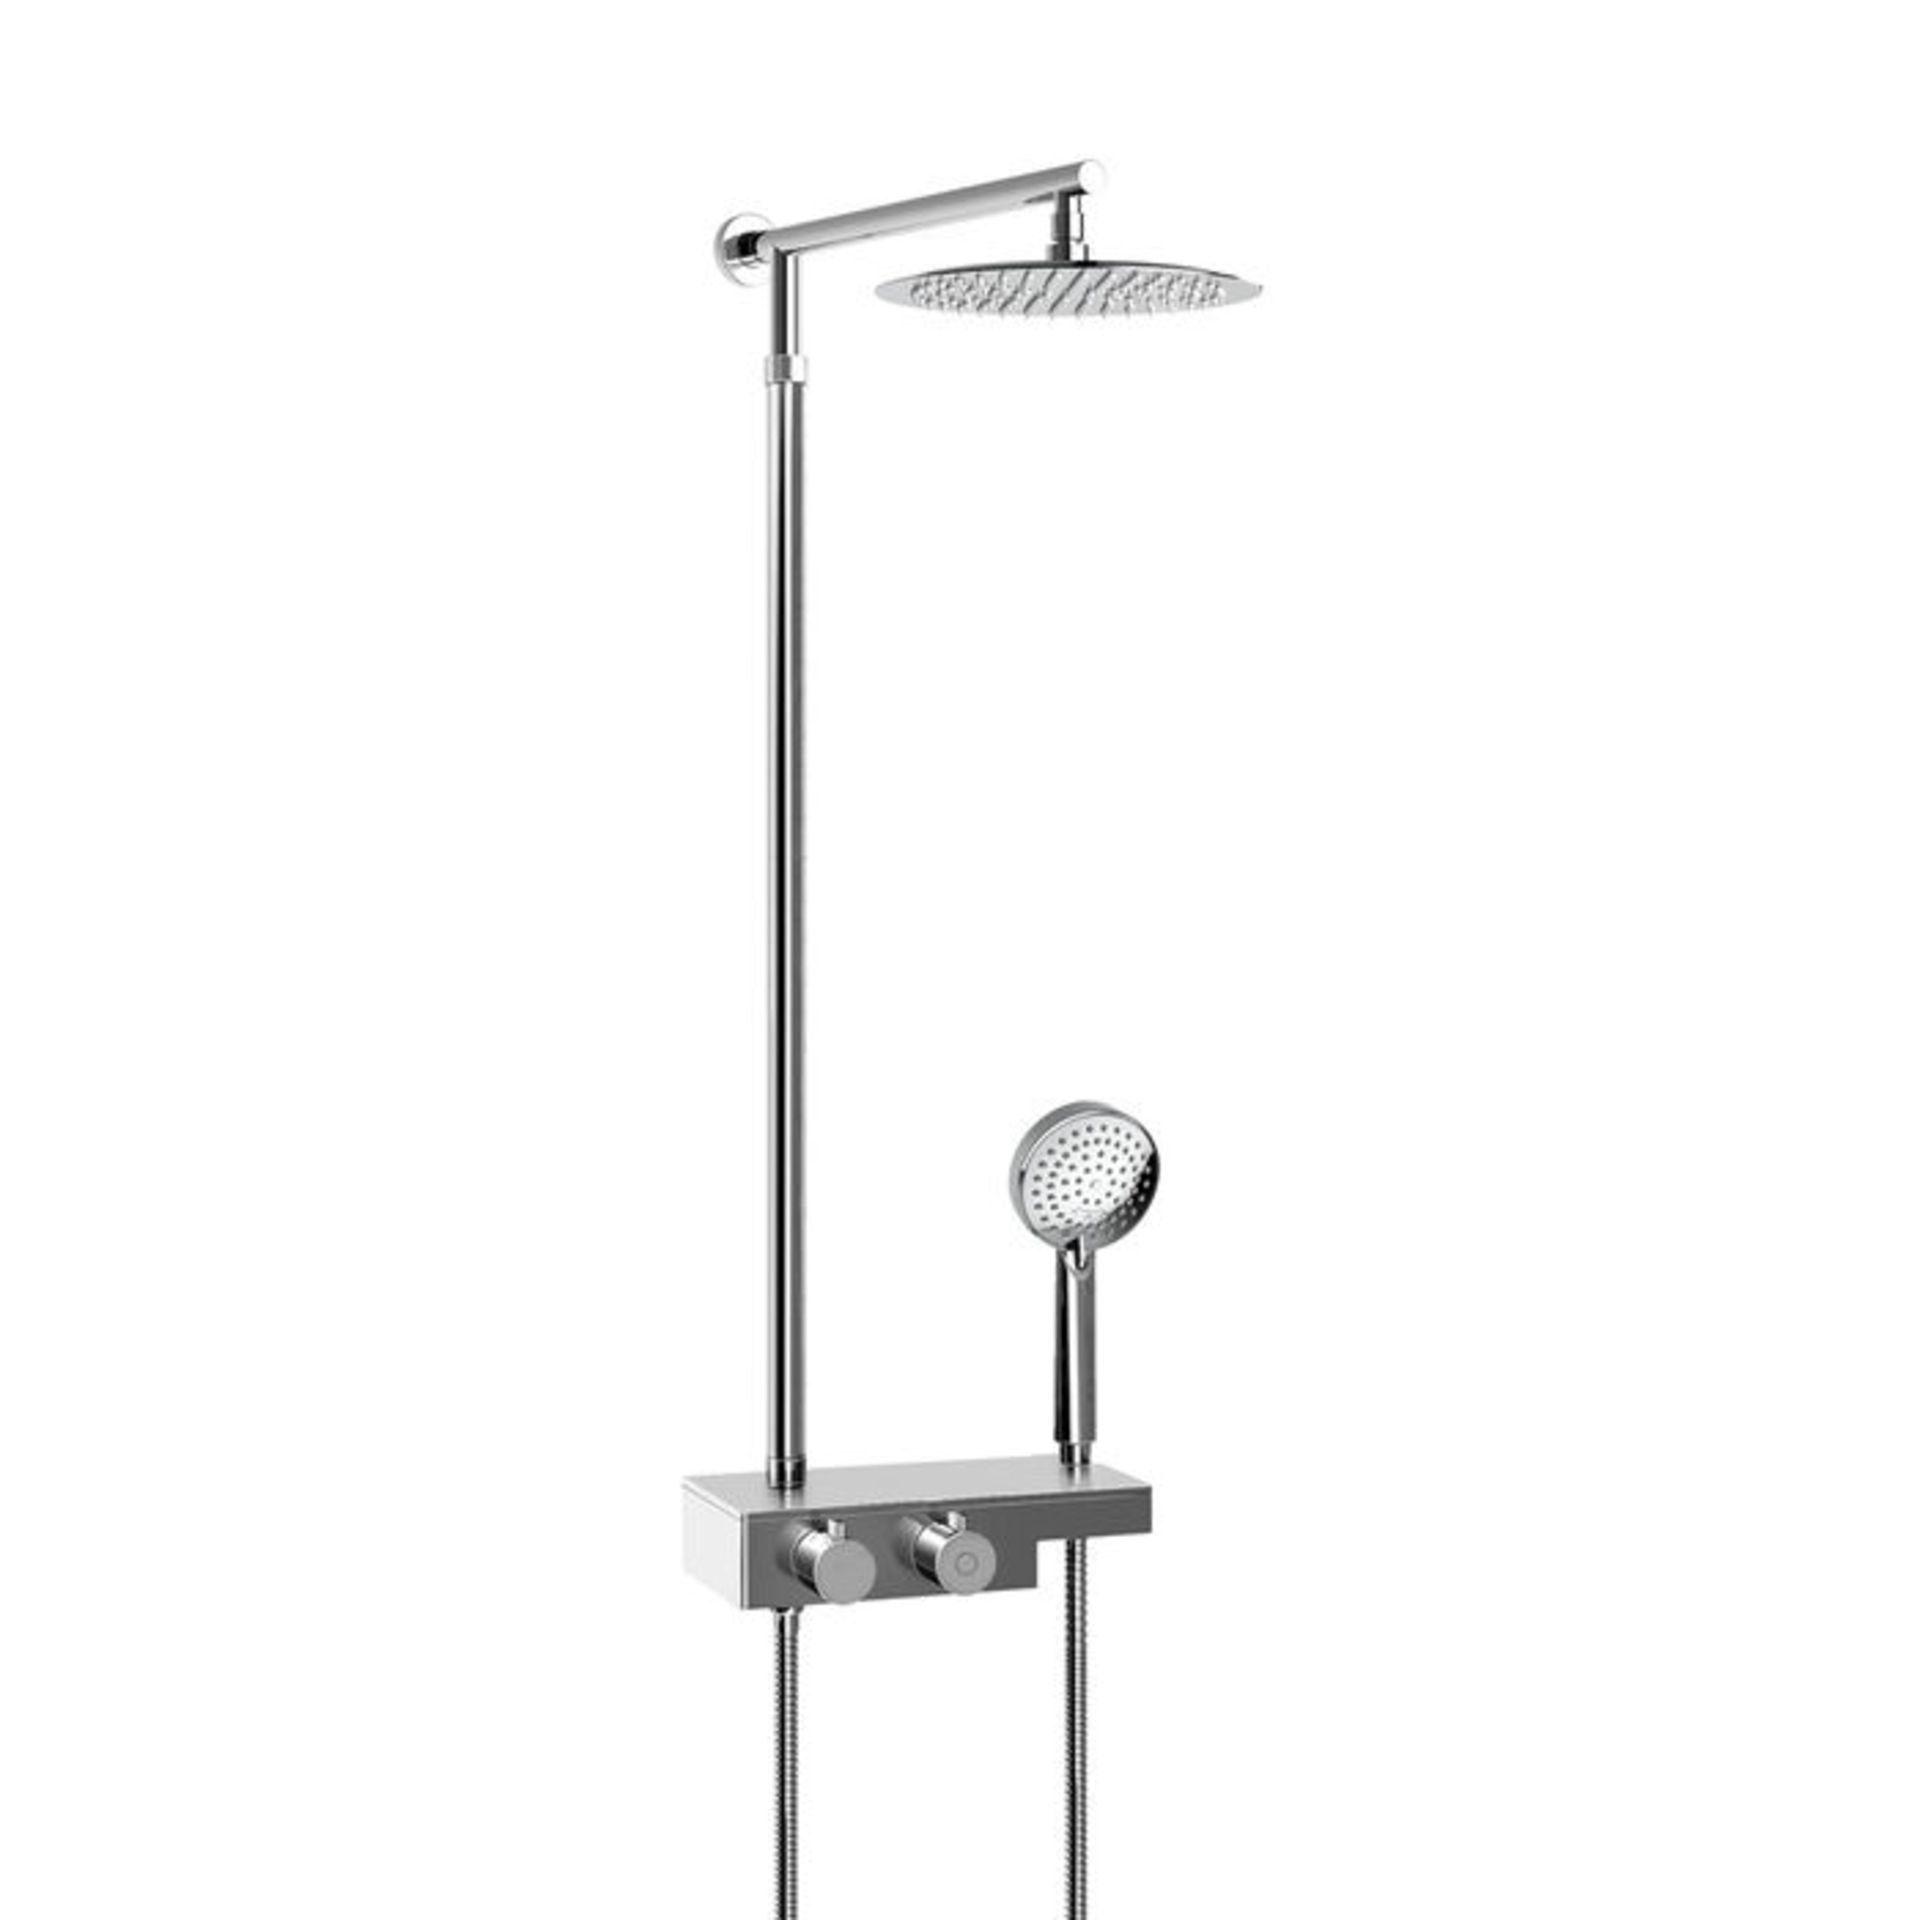 (XL146) 250mm Thermostatic SafeTouch Rain Shower Set Chrome Round - Ø 25 cm - With Hand Show... - Image 2 of 3